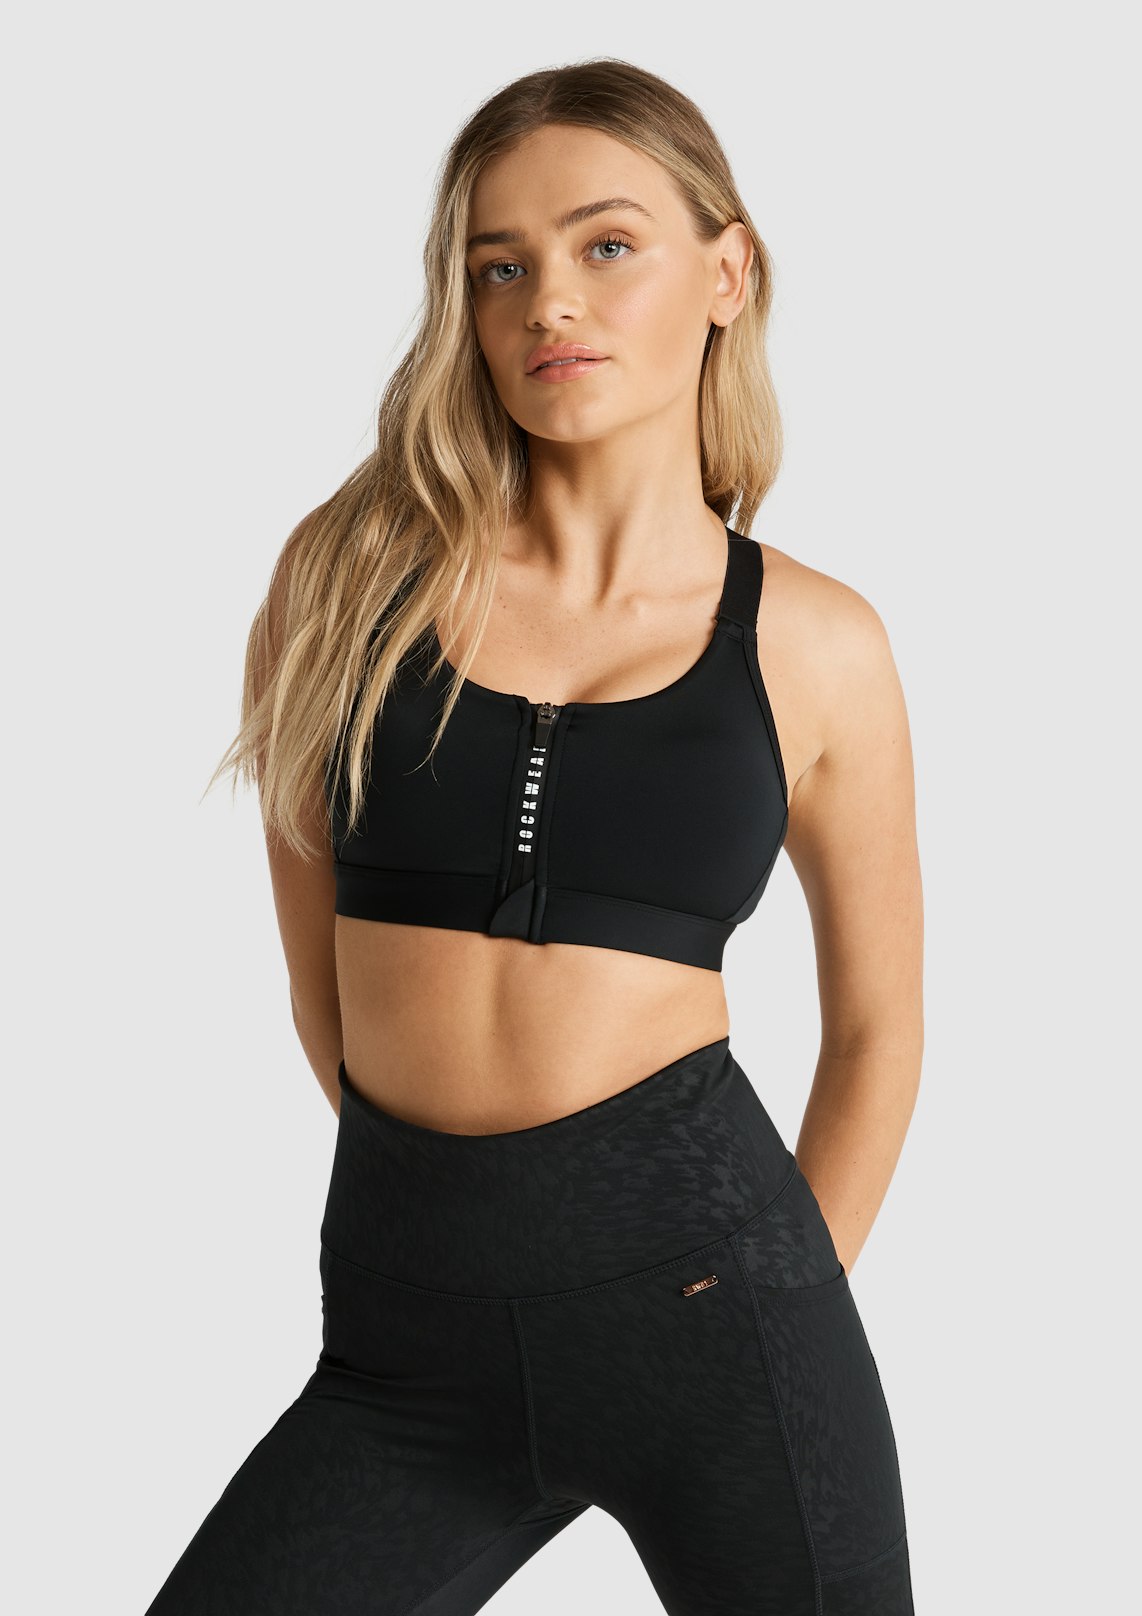 Kinetic Crop Top and Shorts Activewear Set – Velocity Pro Sport